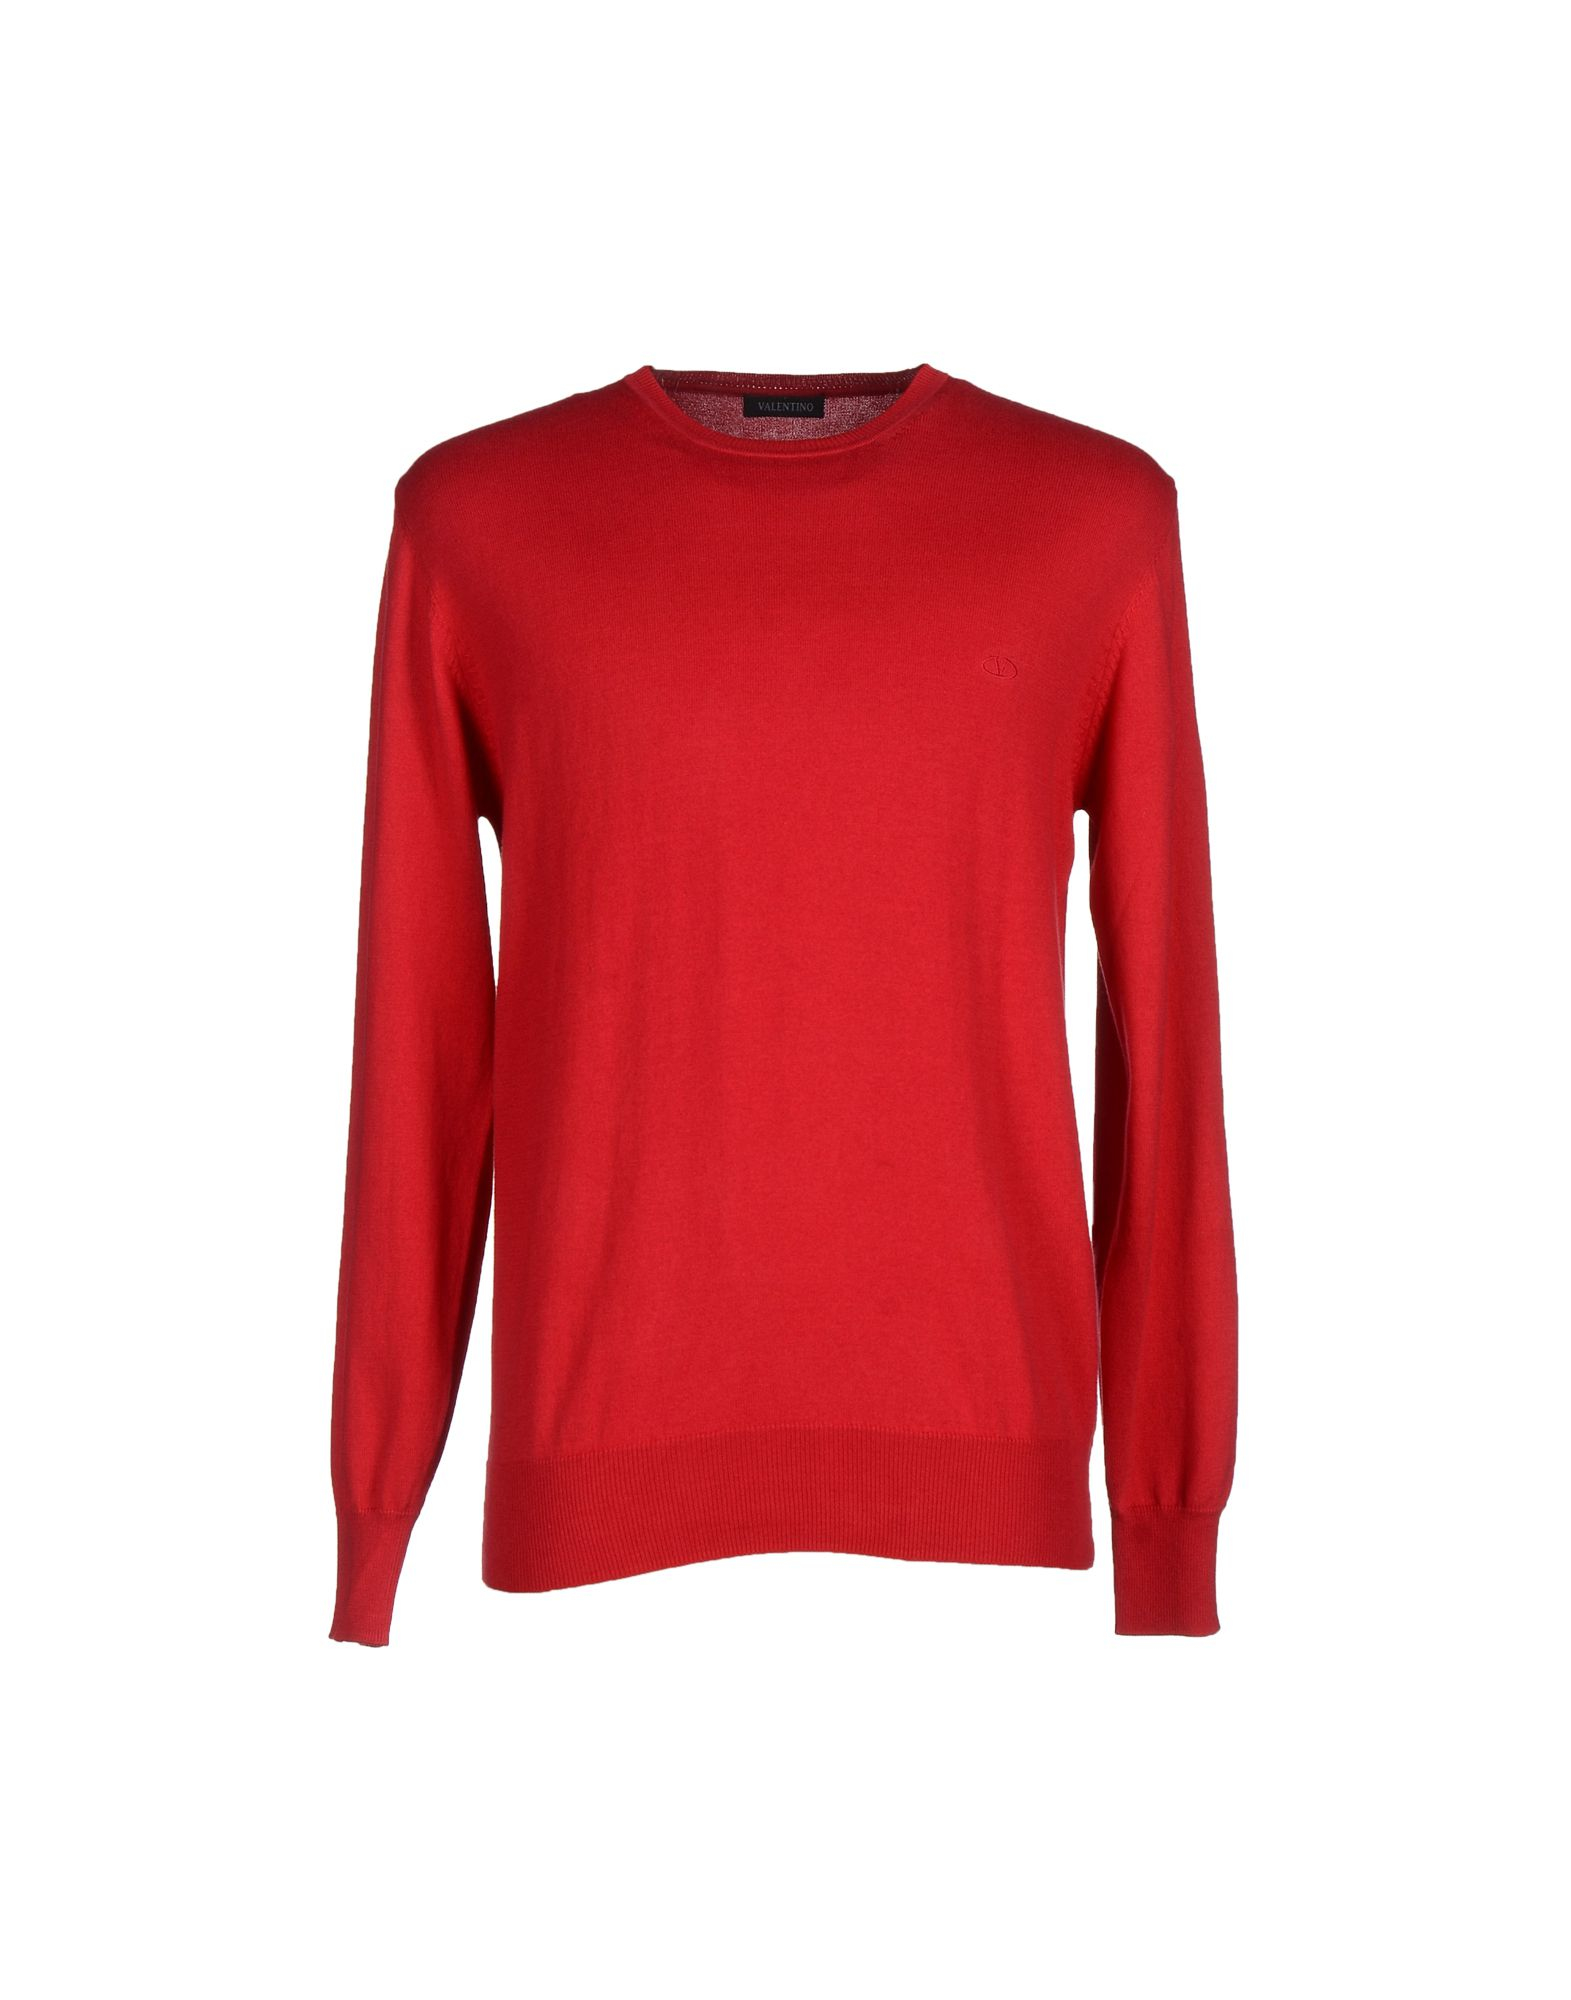 Lyst - Valentino Sweater in Red for Men